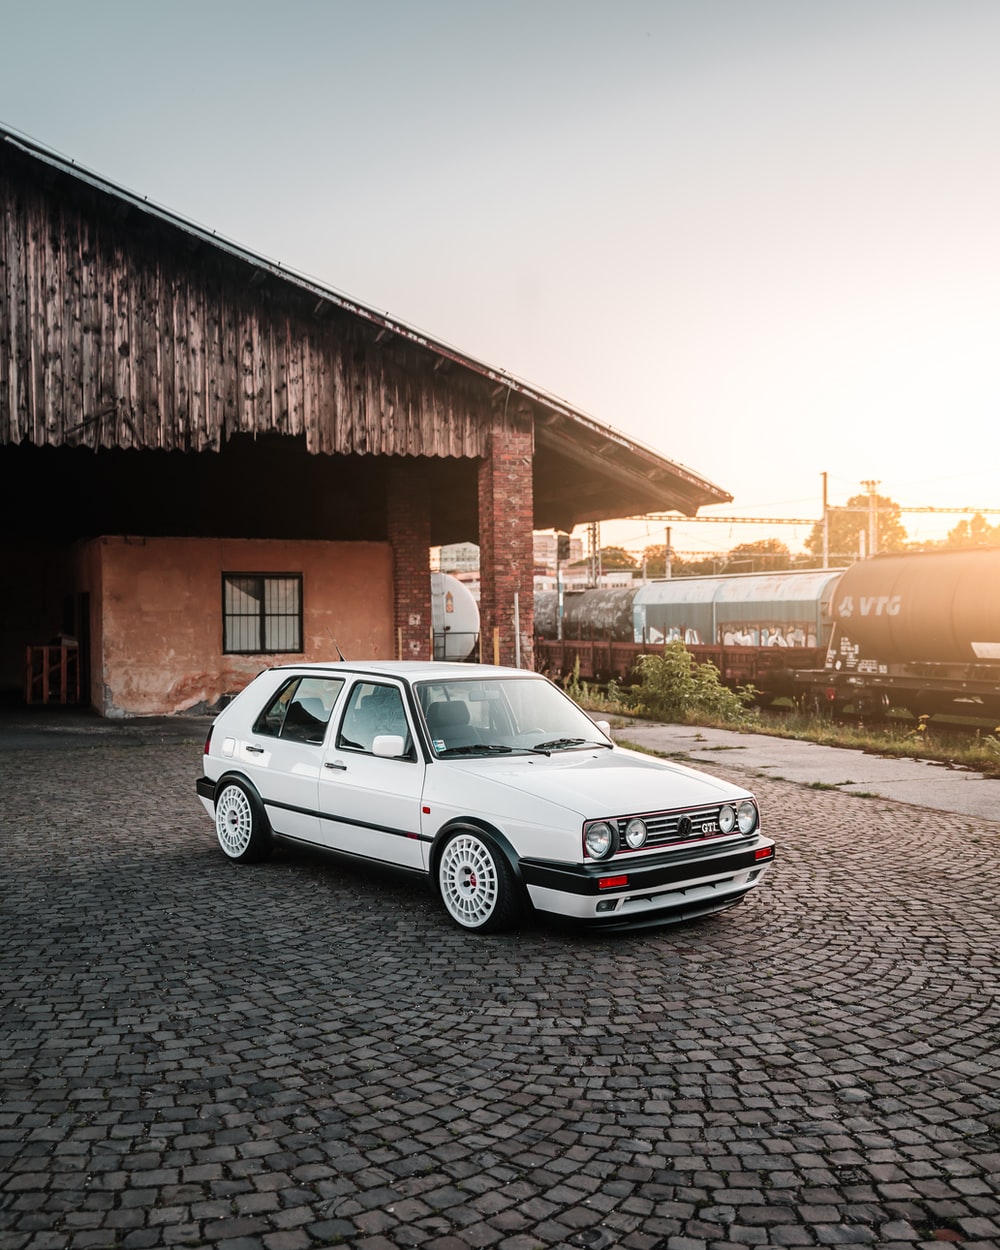 Vw Golf Mk2 Picture. Download Free Image